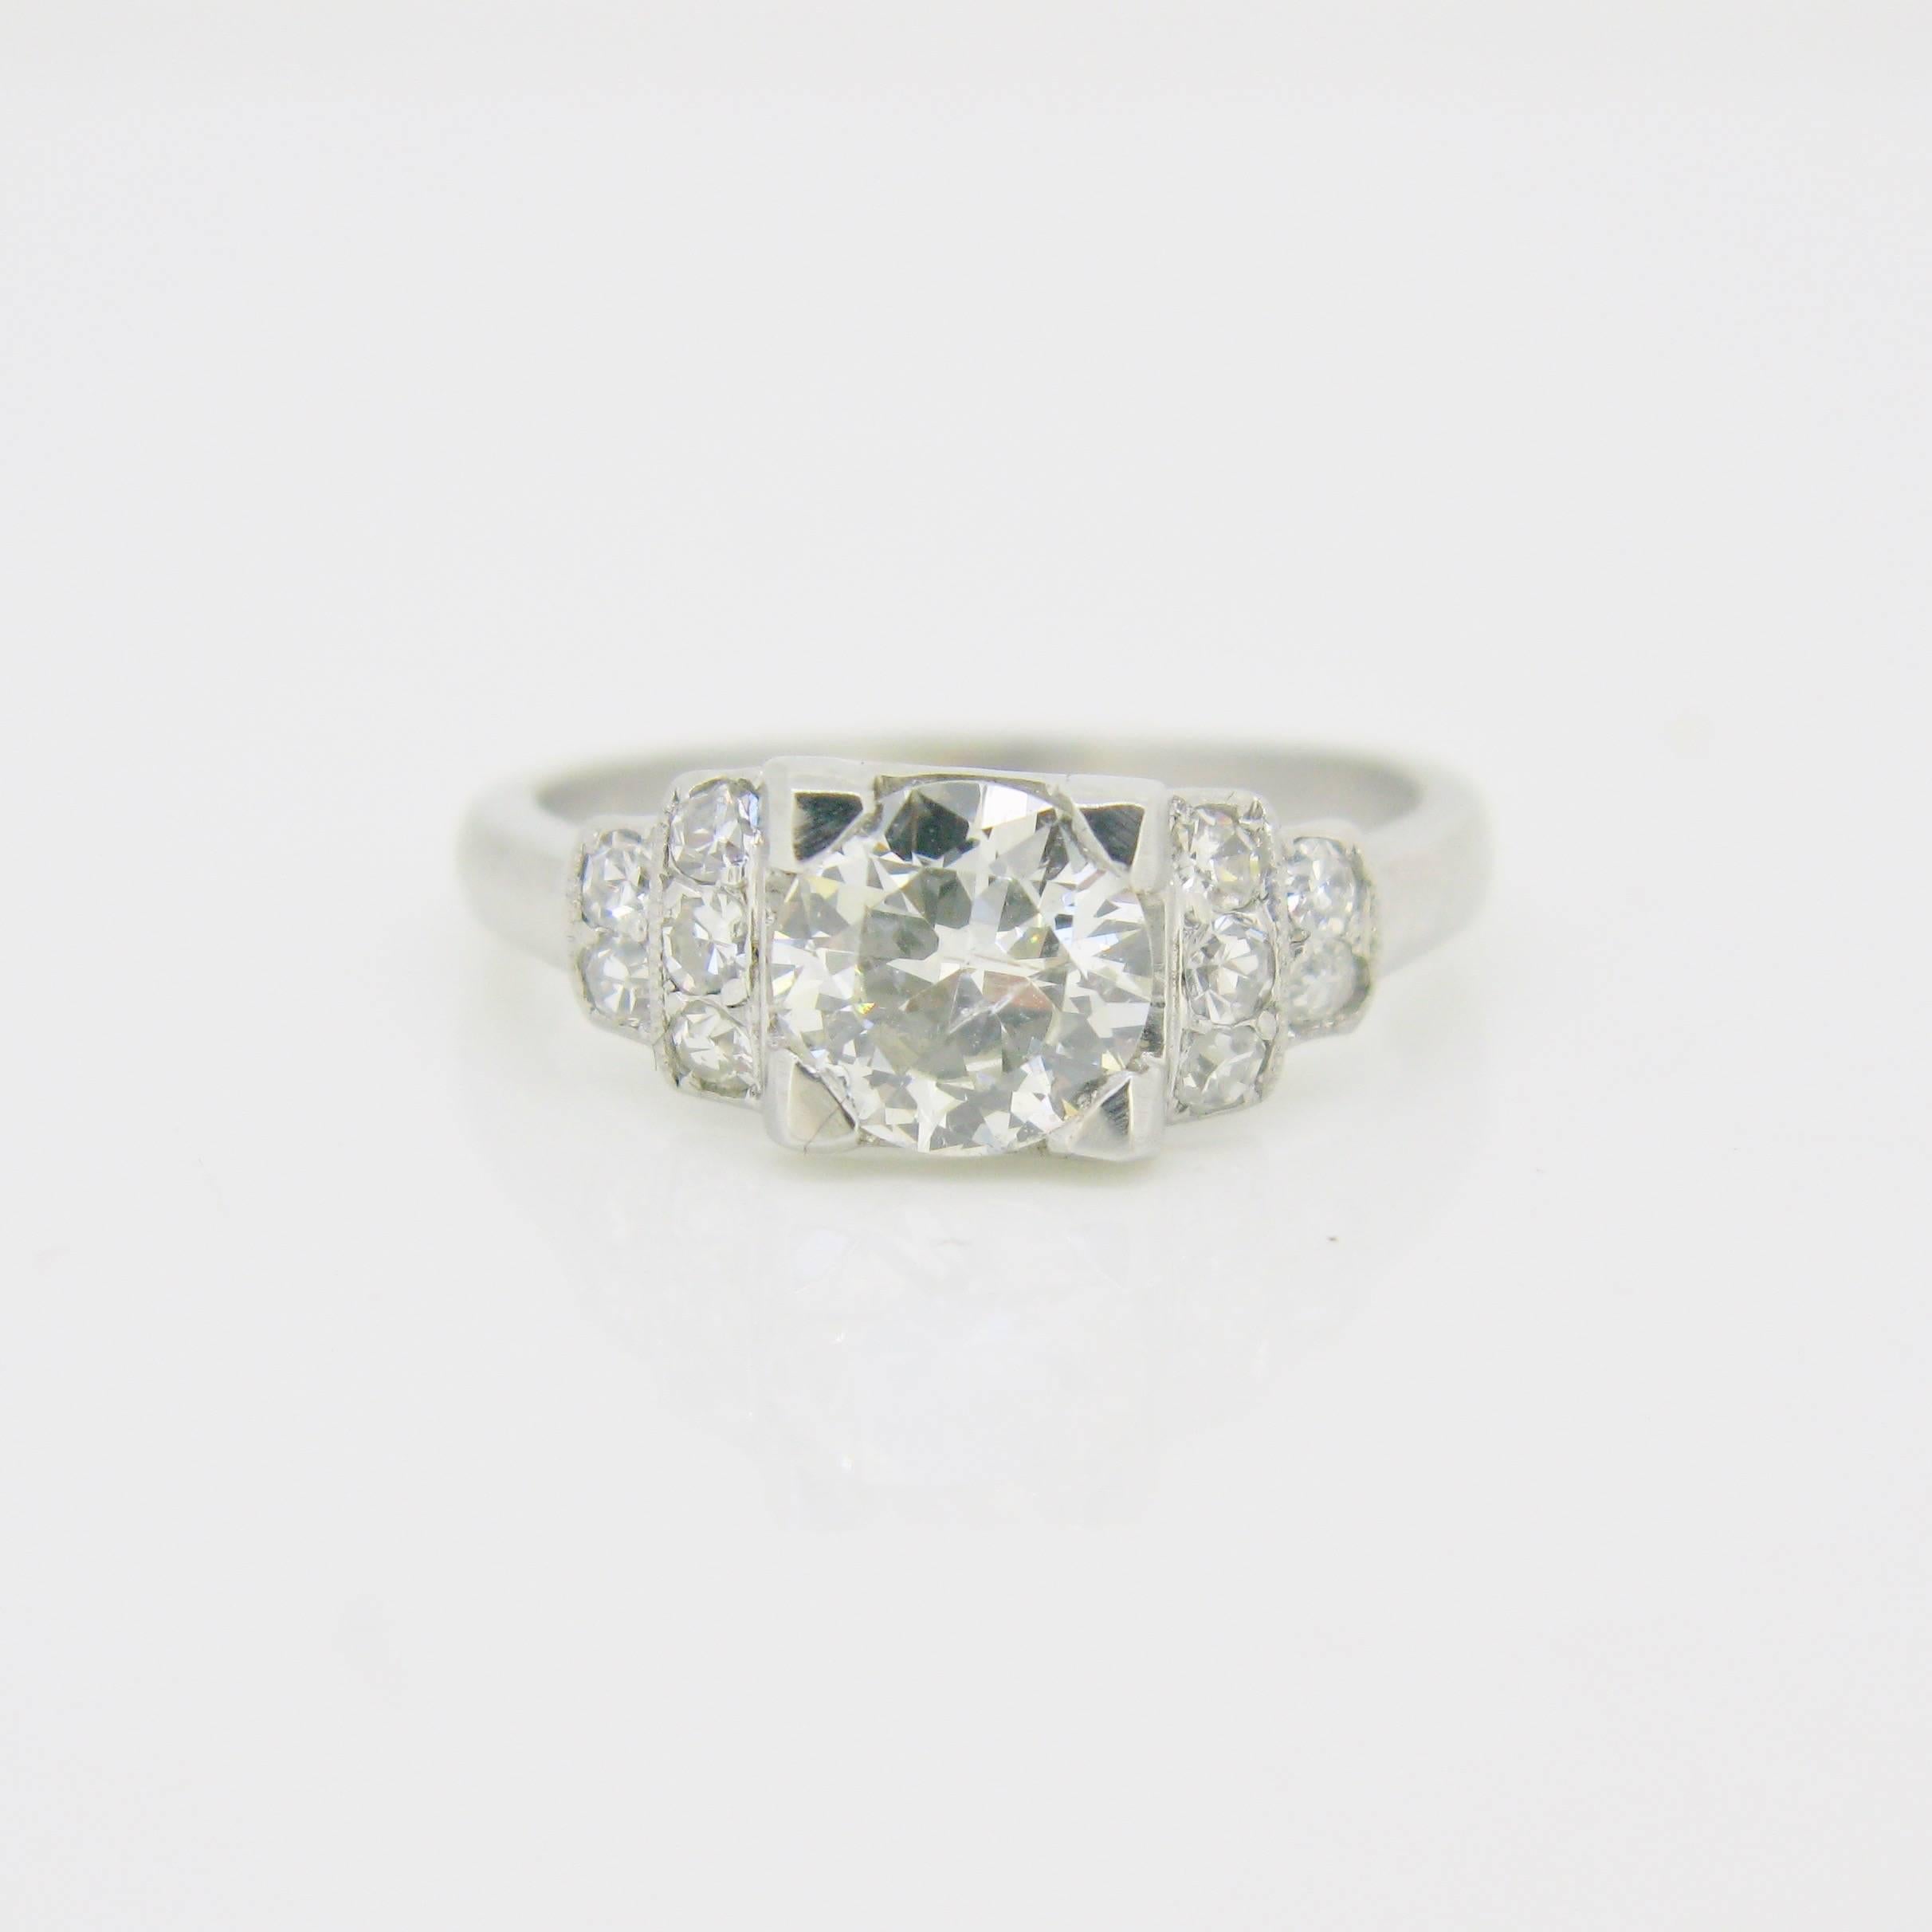 This lovely platinum ring features a stunning brilliant cut diamond weighing approximately 1ct (color I, clarity SI). It is framed by 5 diamonds on each side for a total weight of approximately 0,25ct. The diamonds are set securely by 4 prongs and